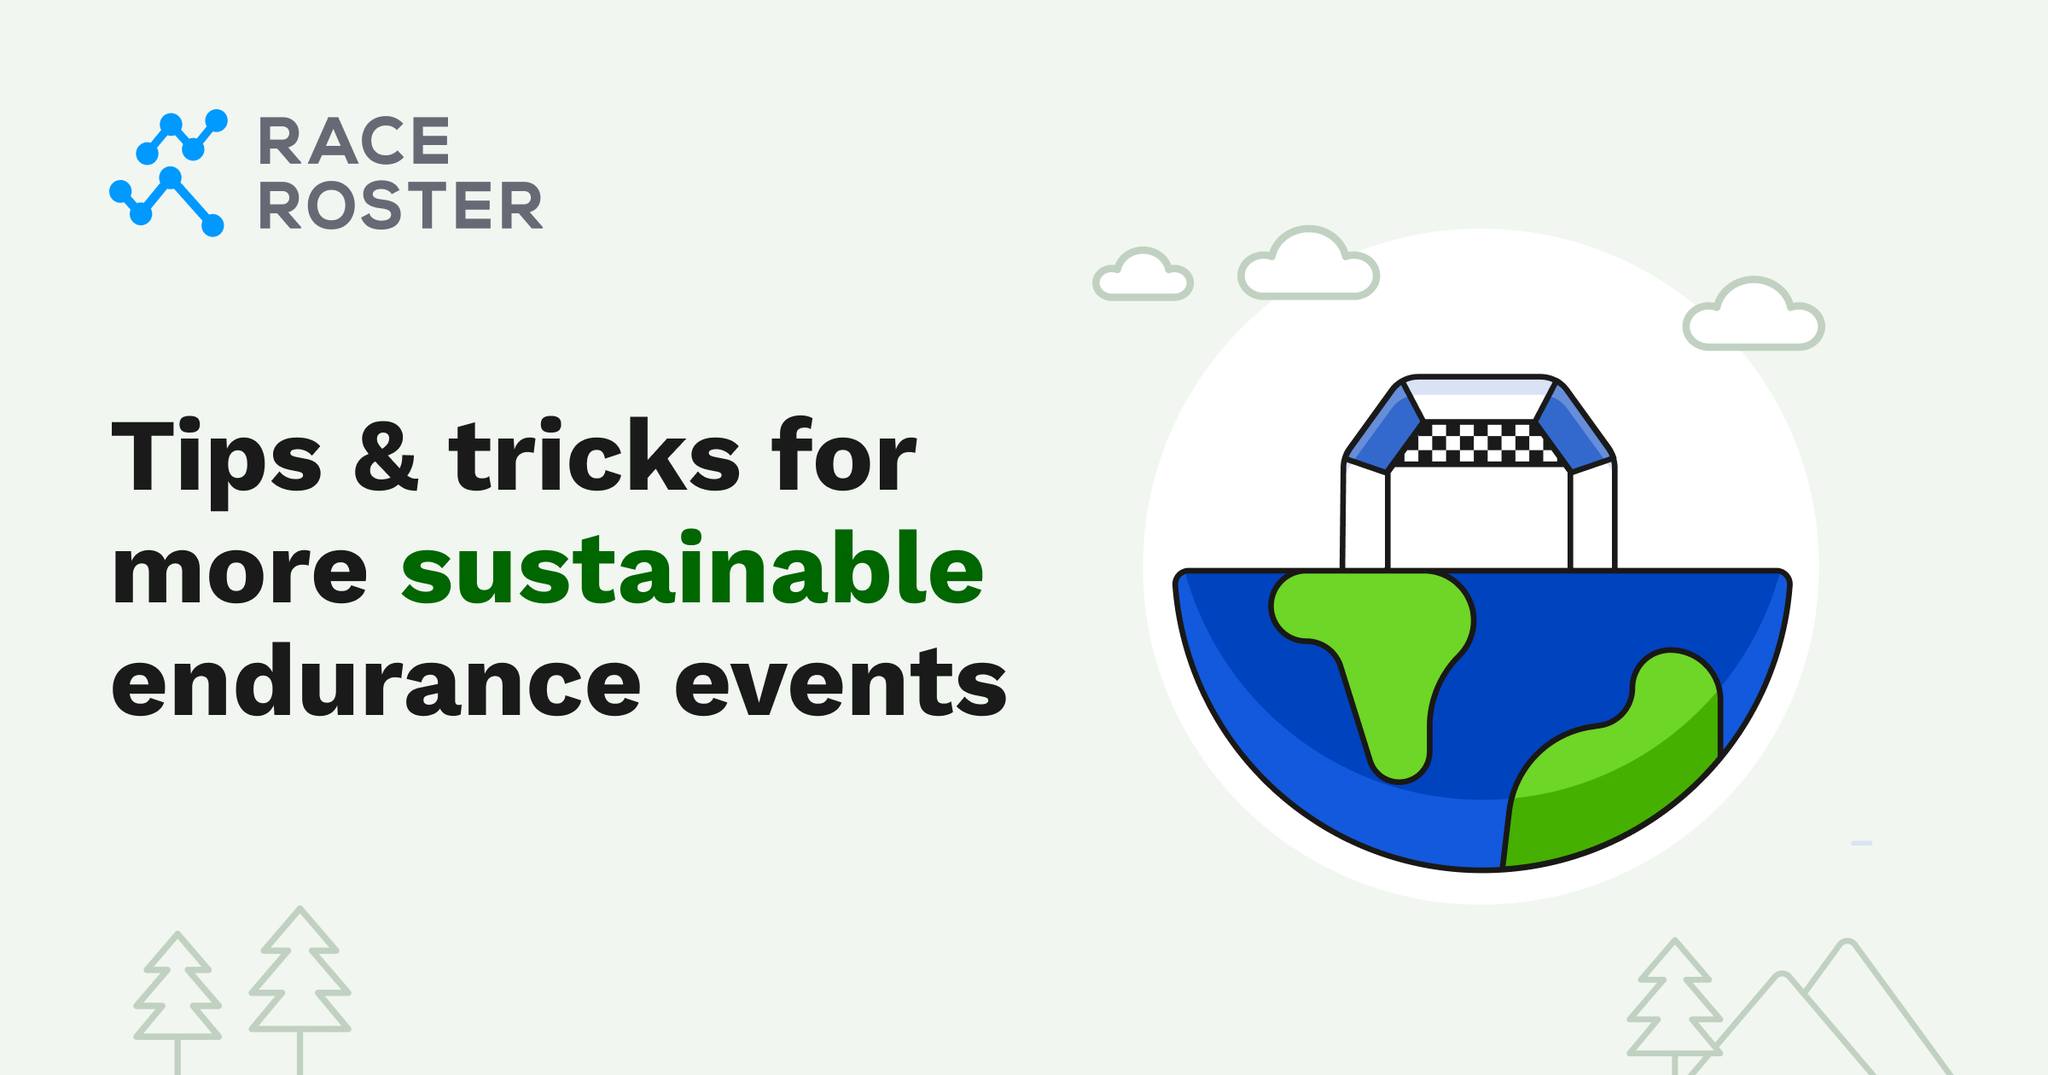 Tips & tricks for more sustainable endurance events